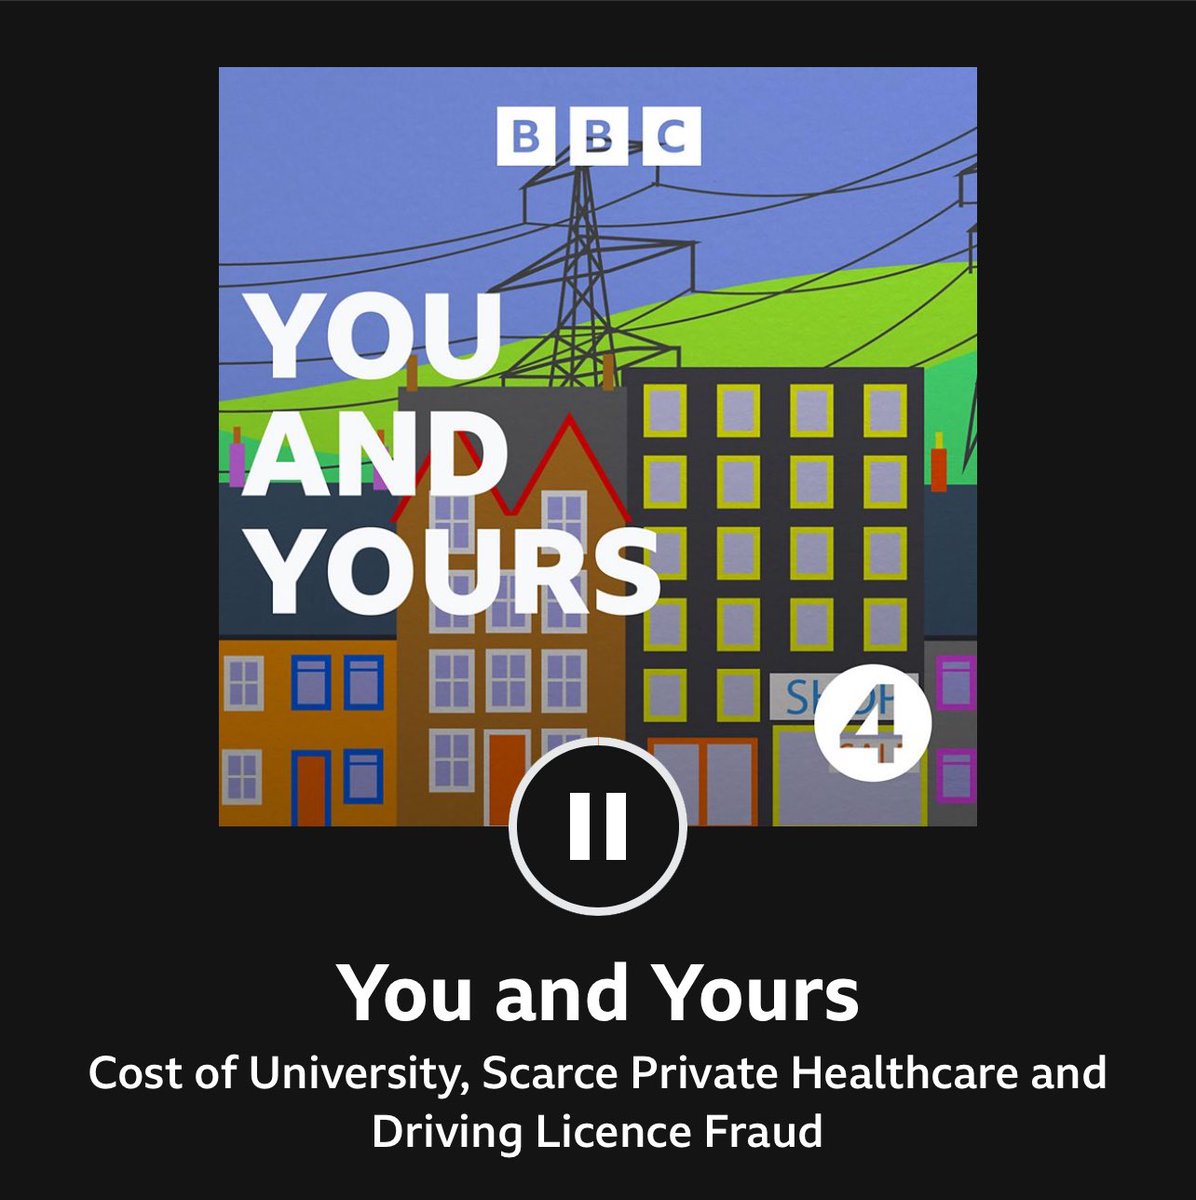 Private Healthcare busted on #YouAndYours. 
-Premiums get unaffordable the older you are (when needed most).
-Most acute conditions can’t be Private as there are no emergency resources (when things go wrong, the #NHS still has to pick up the pieces)
-You still have to wait.